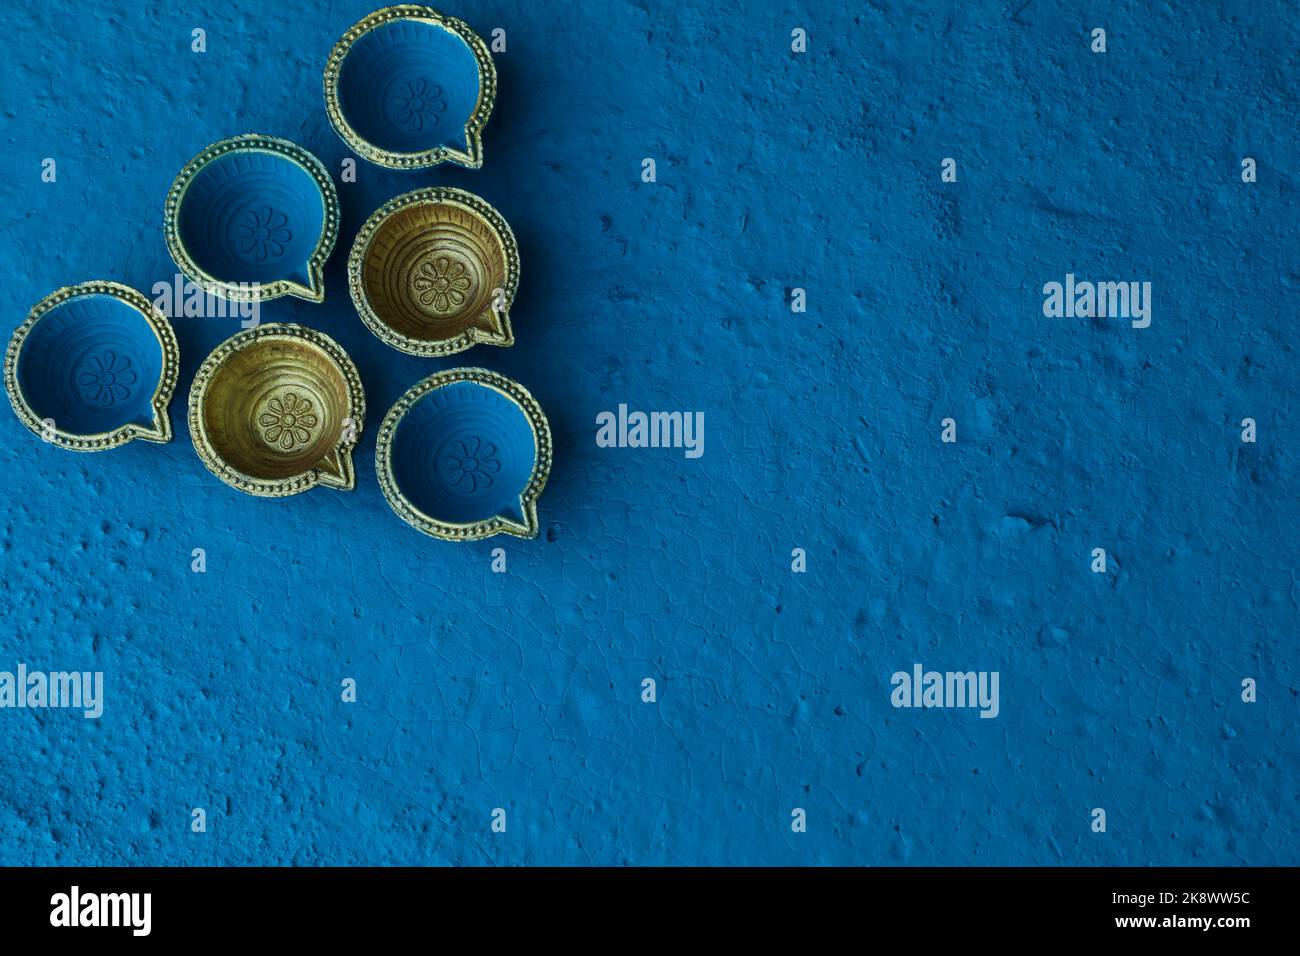 Blue and golden color traditional clay oil lamps Diya arranged on blue color background. Concept for Diwali, Deepavali, Pooja, prayer, worship. Stock Photo